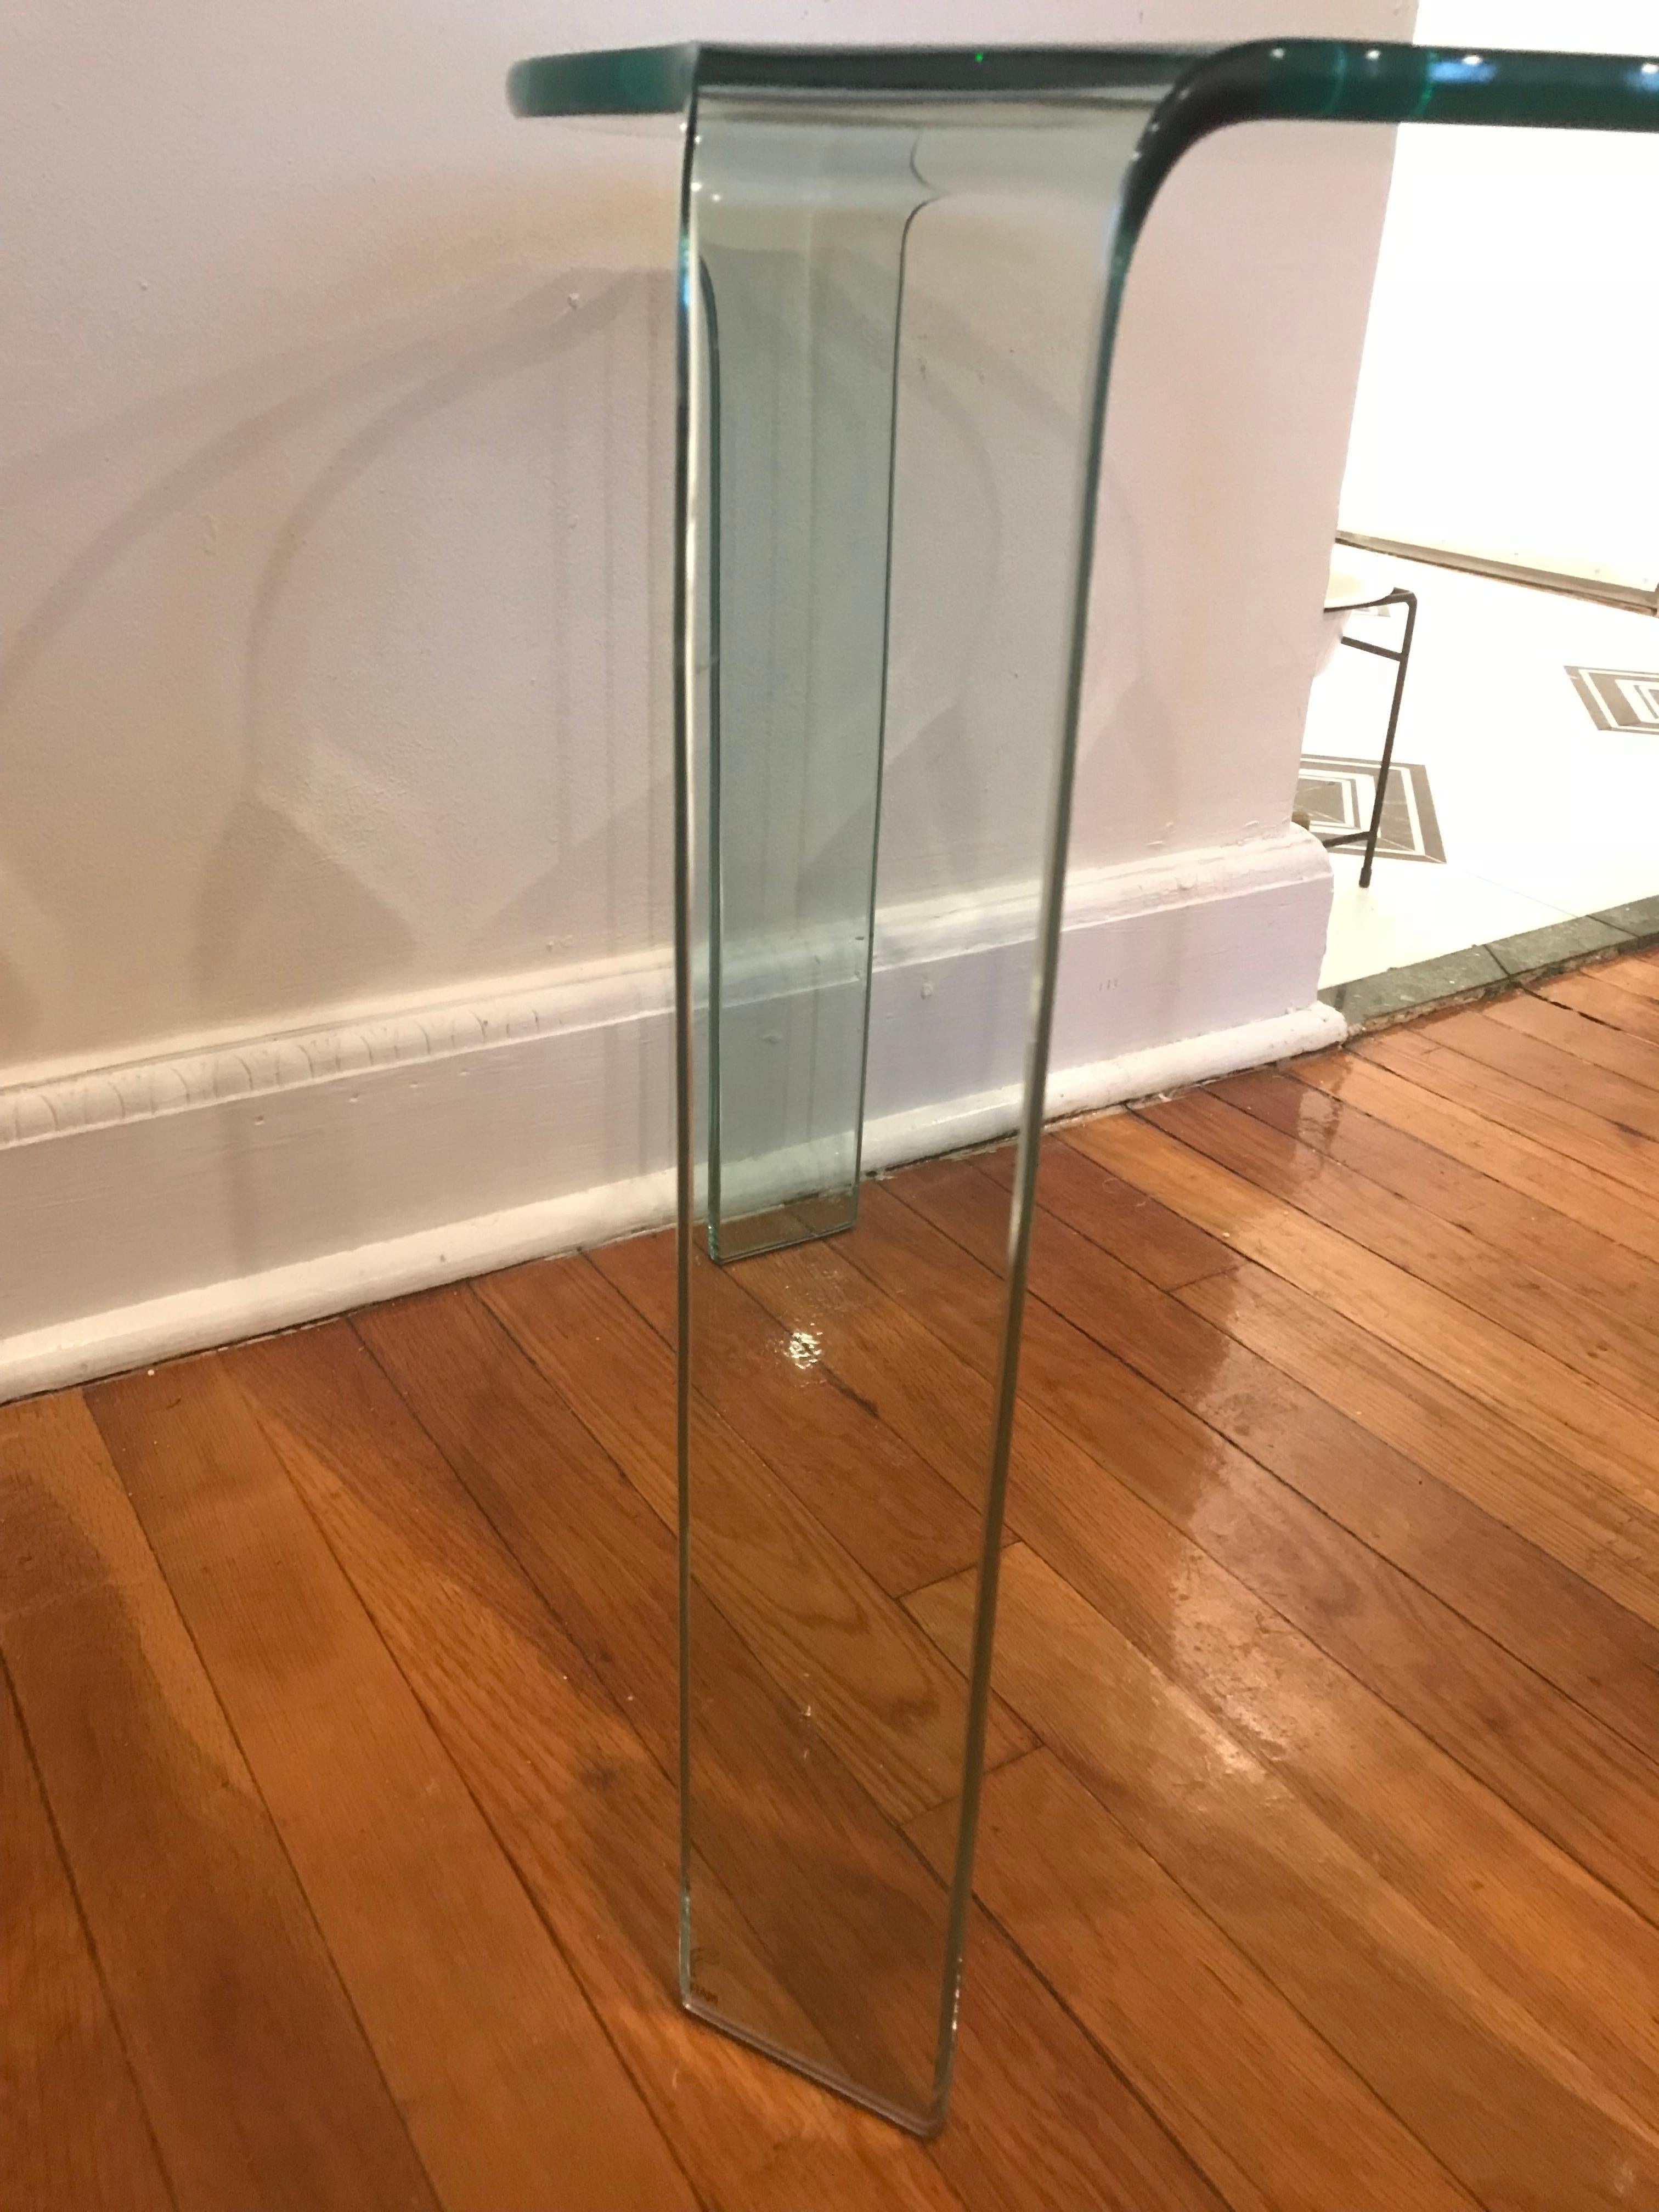 Late 20th Century Curved Glass Side Table, Homage to Alvar Alto, Manufactured in Italy by Fiam